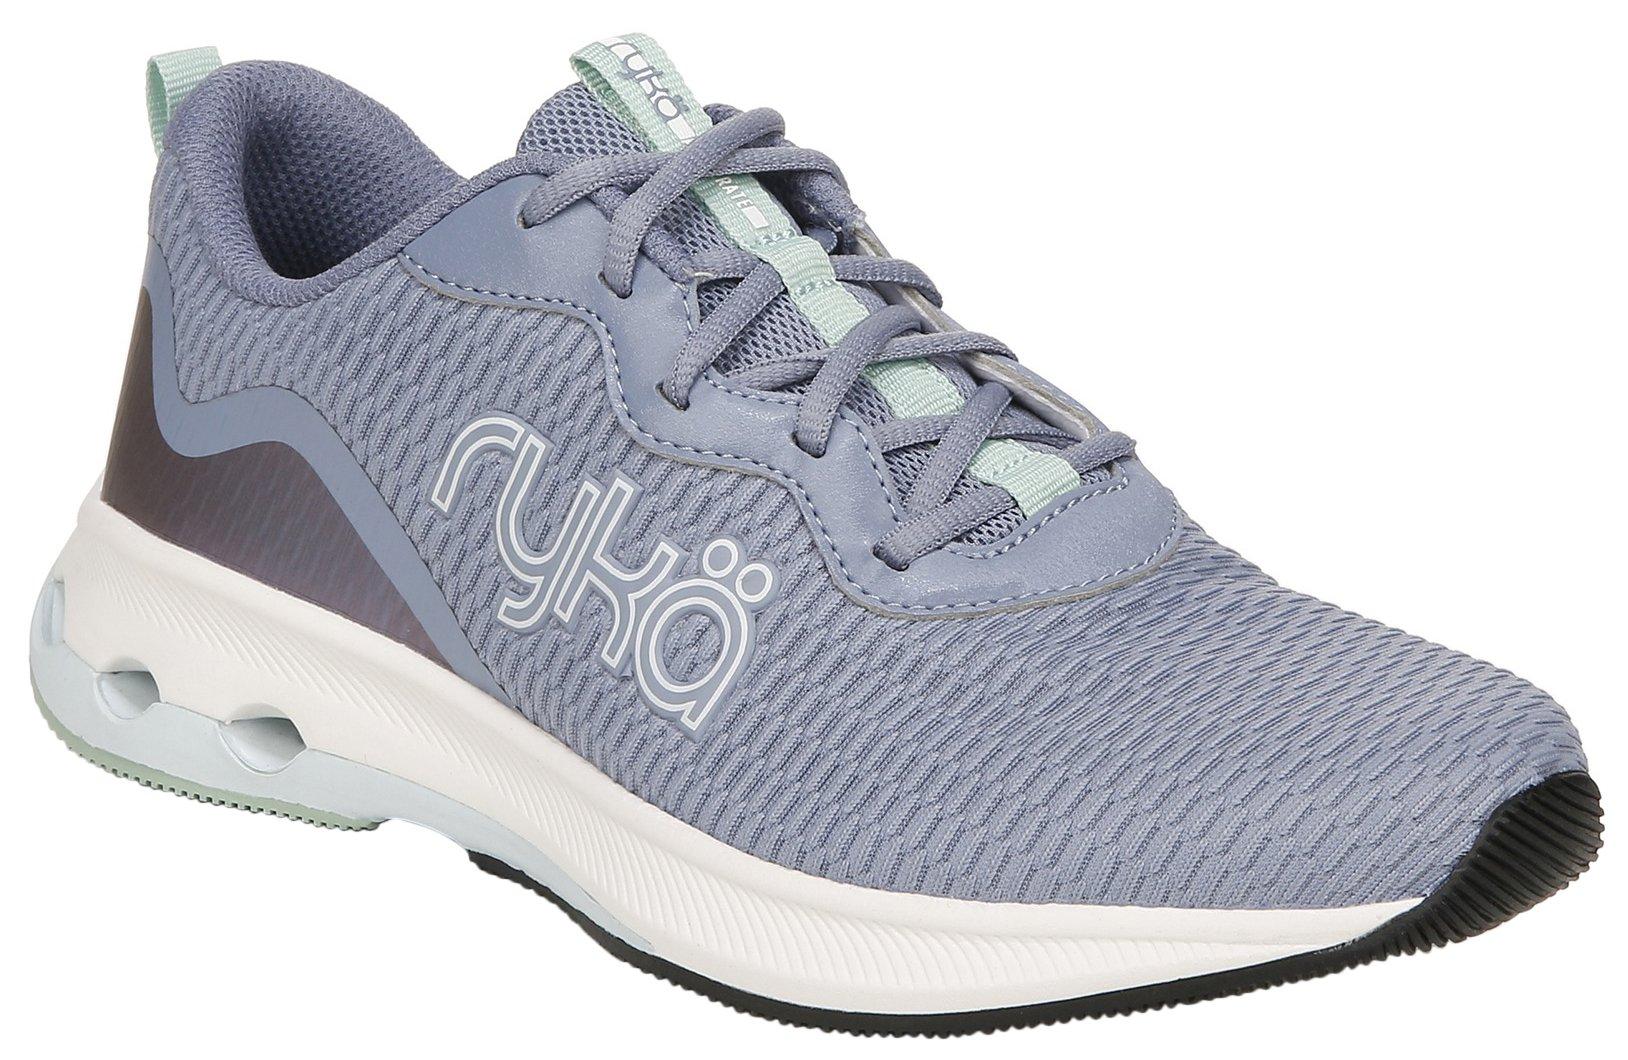 Ryka Womens Accelerate Athletic Shoes